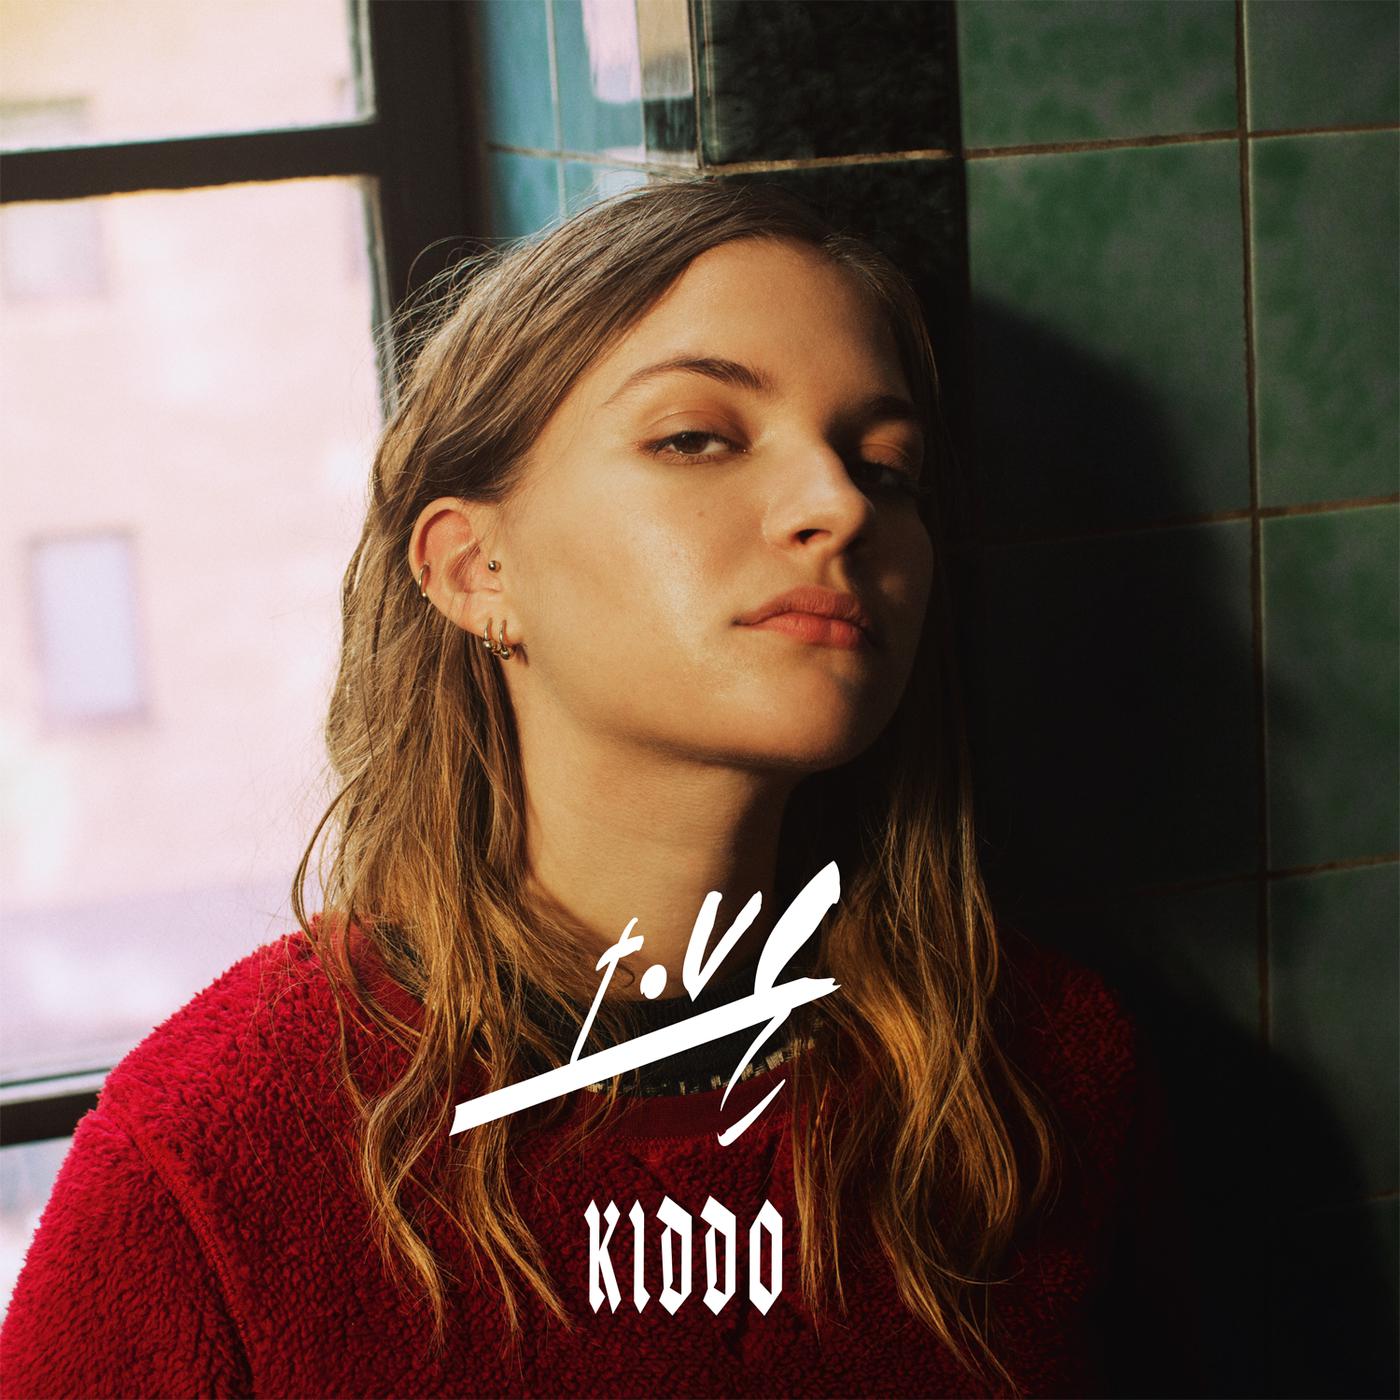 Even If I'm Loud It Doesn't Mean I'm Talking to You歌词 歌手Tove Styrke-专辑Kiddo-单曲《Even If I'm Loud It Doesn't Mean I'm Talking to You》LRC歌词下载